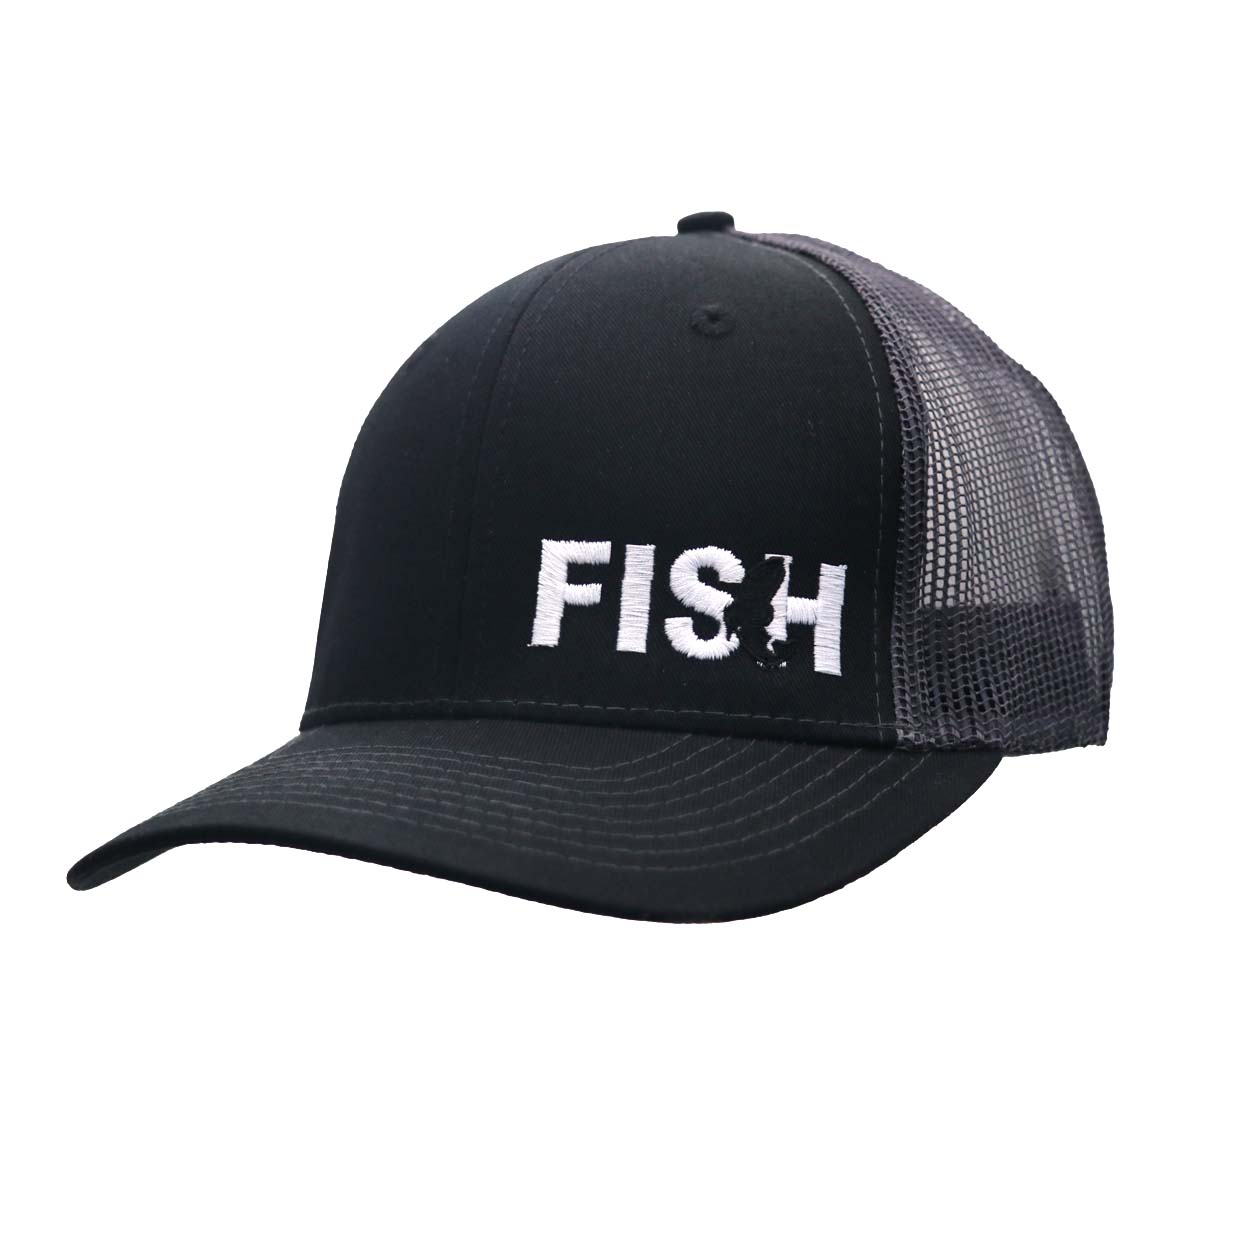 Fish Catch Logo Night Out Embroidered Snapback Trucker Hat Black/Charcoal